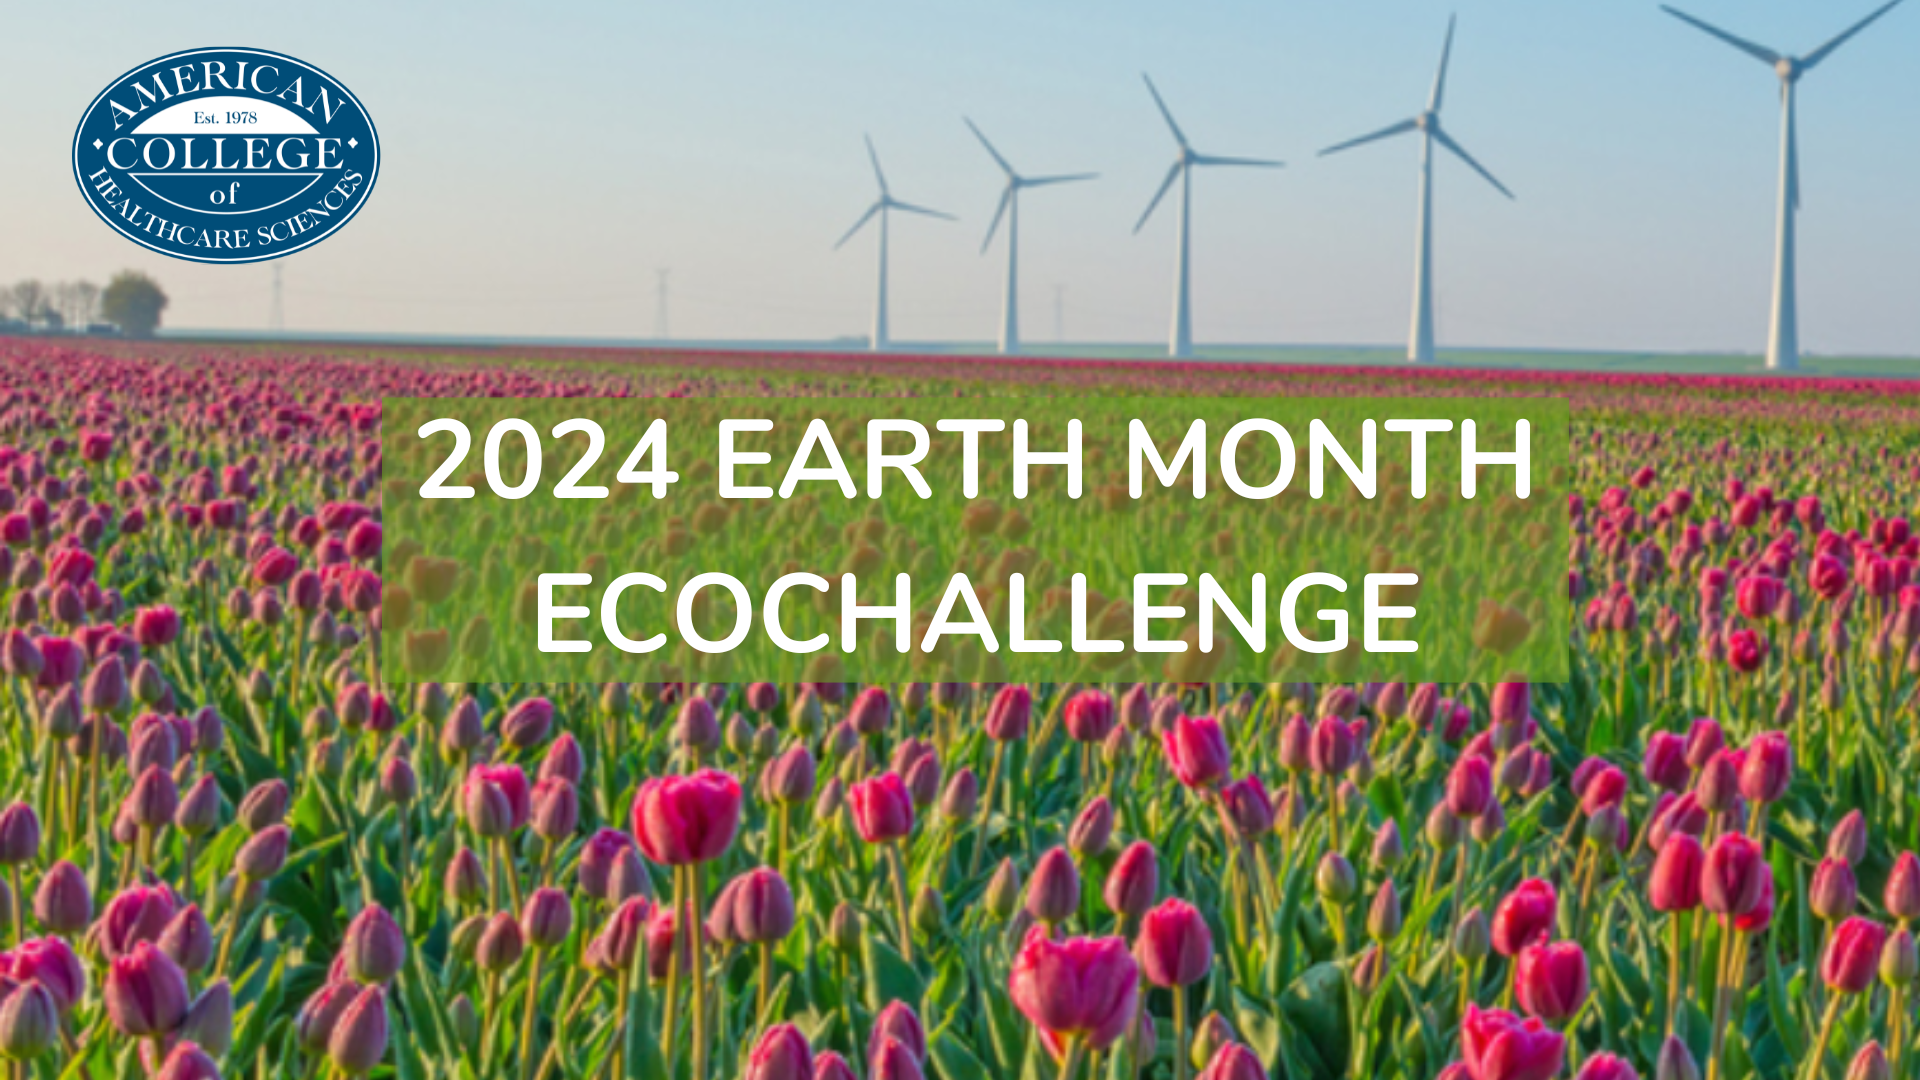 Earth Month Ecochallenge with a field of tulips and windmills